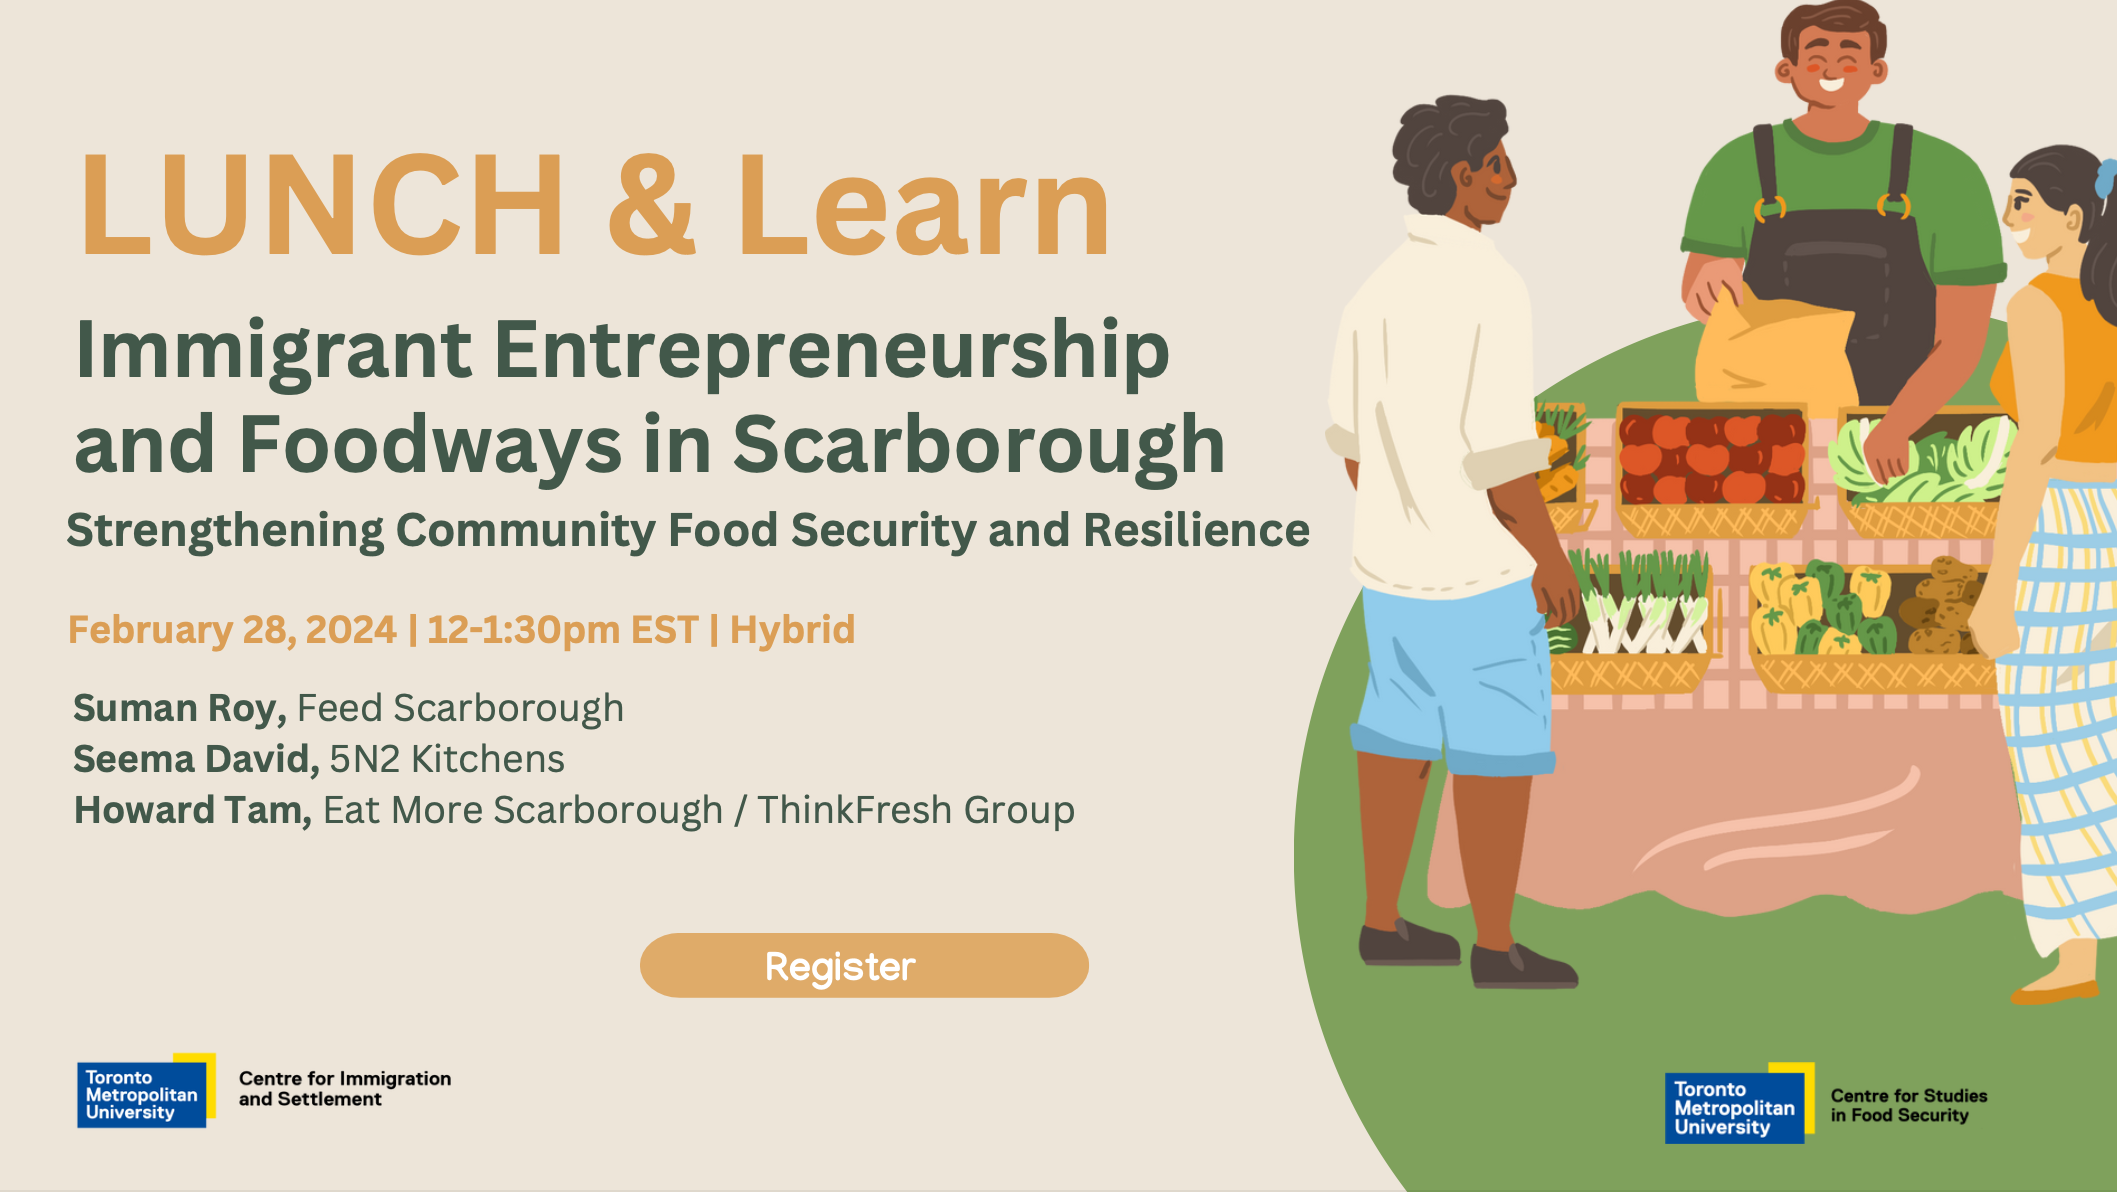 Immigrant Entrepreneurship and Foodways in Scarborough: Strengthening Community Food Security and Resilience